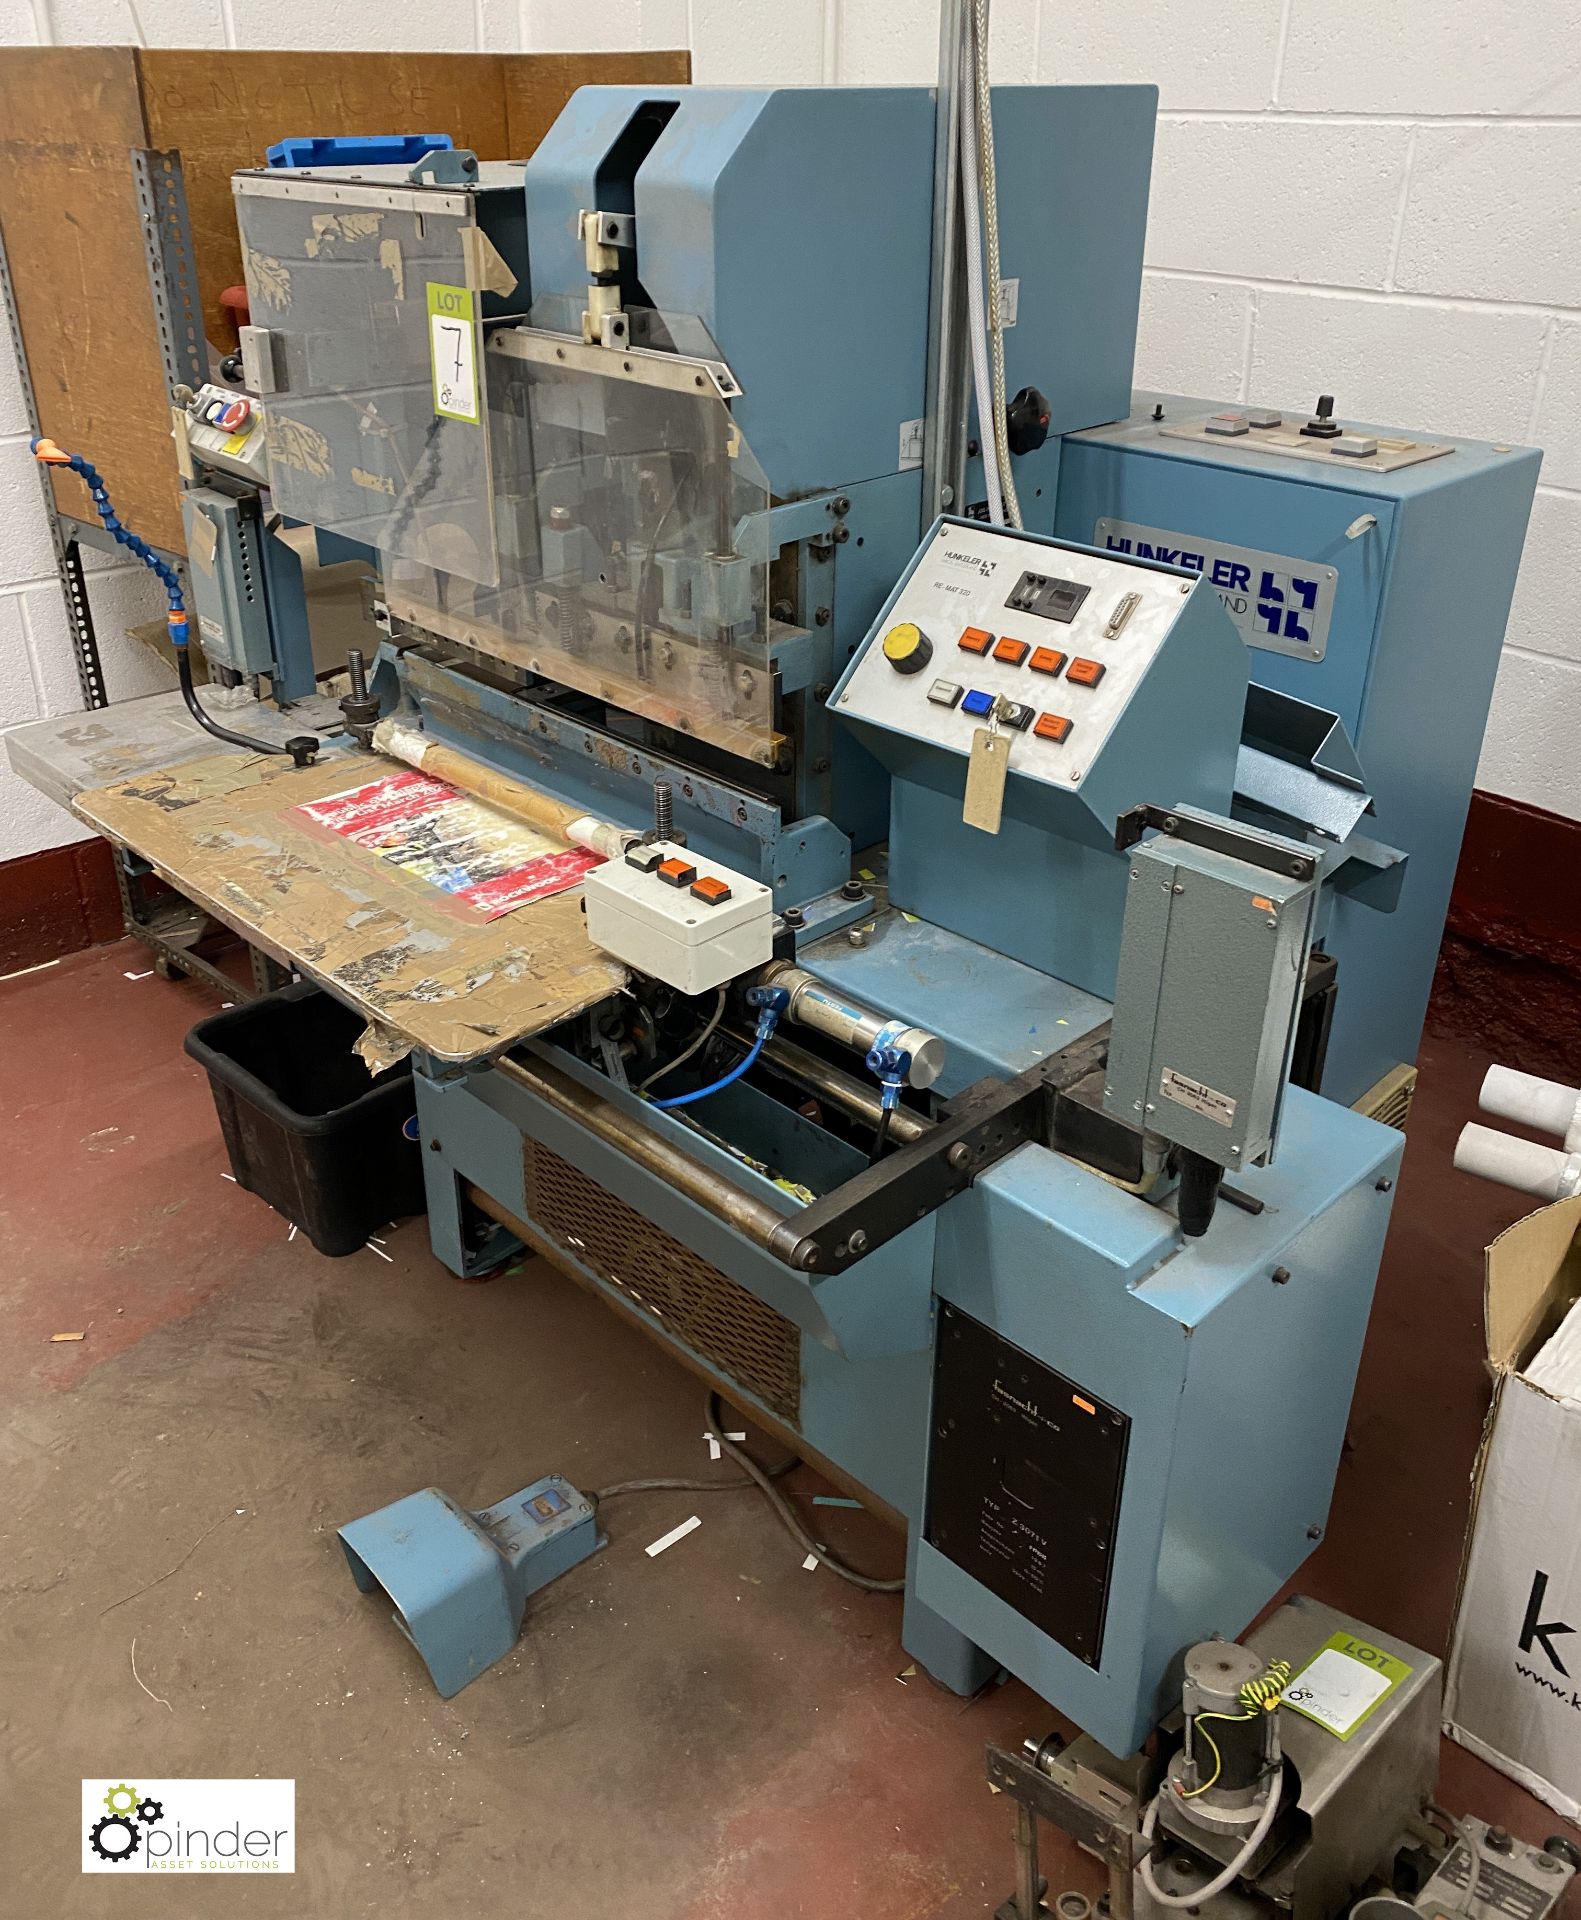 Hunkeler Re-Mat Step Index Cutting Machine, serial number 52216/1, 240volts, with 2 colour print - Image 6 of 38